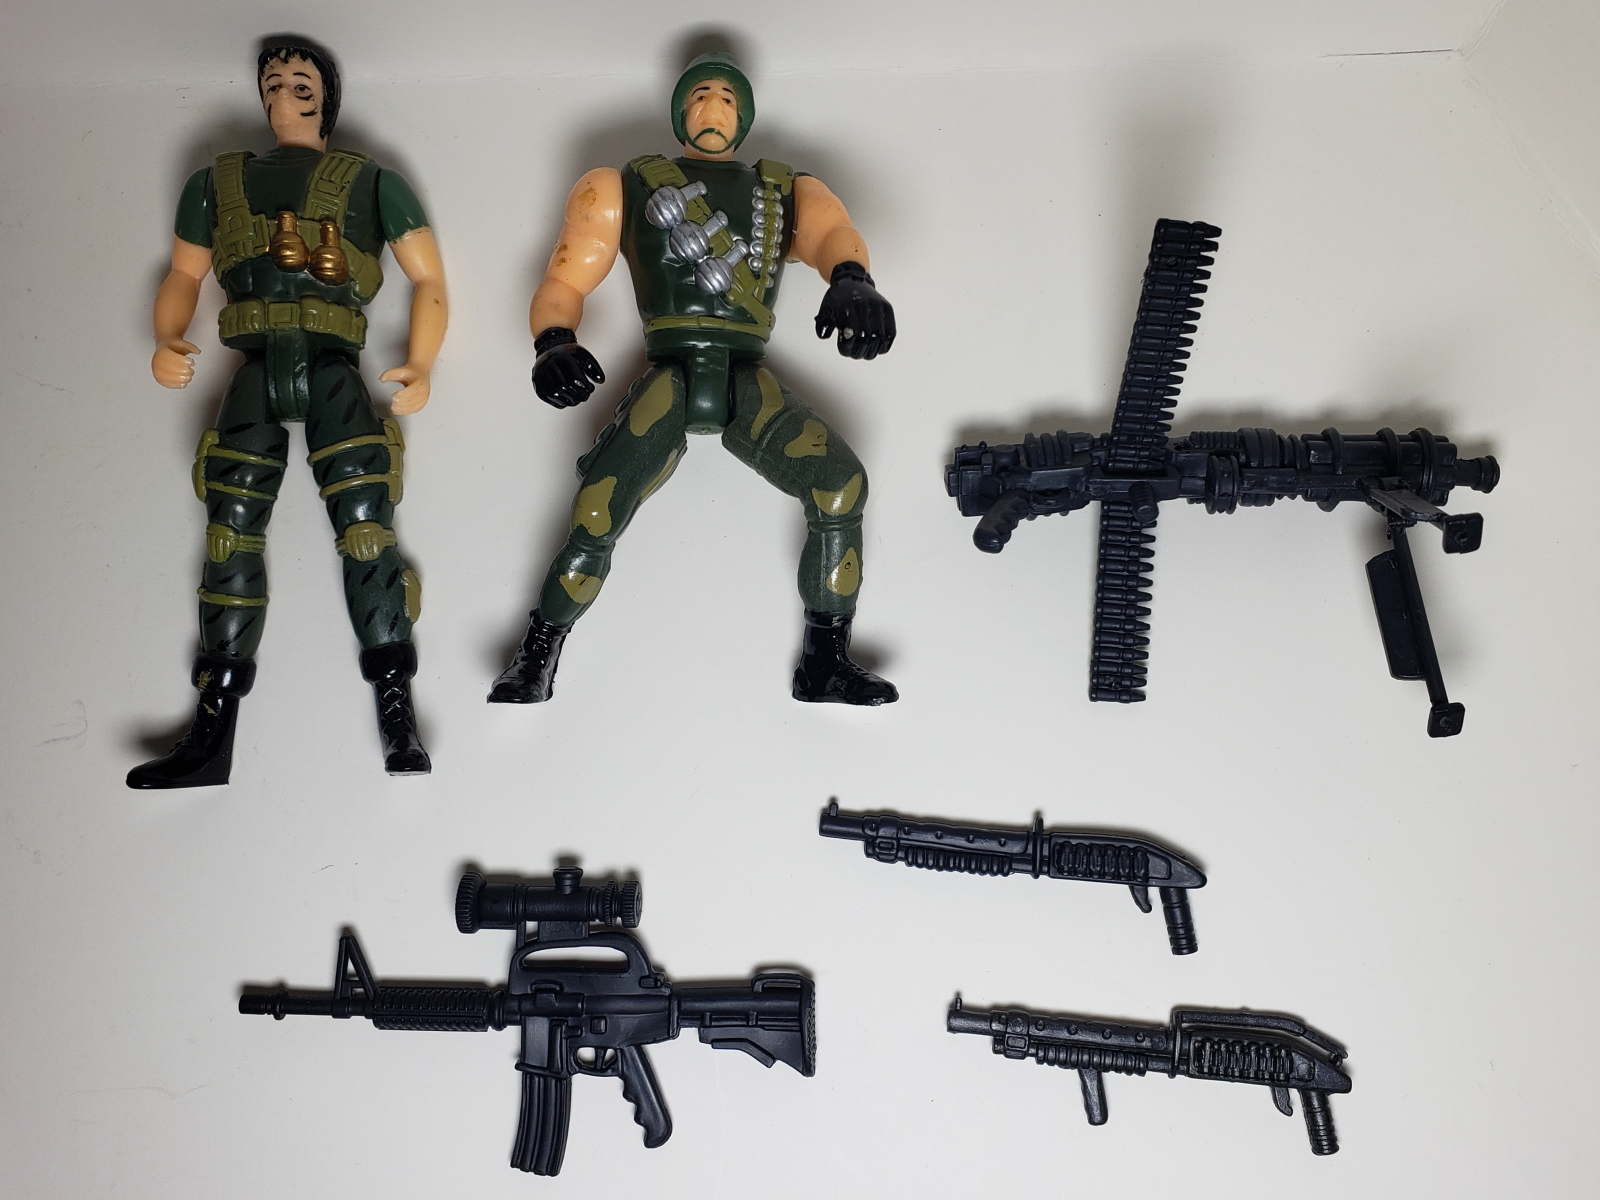 Corp. Hicks vs. King Alien 2-Pack from Aliens vs. Marine – Action Figures  and Collectible Toys